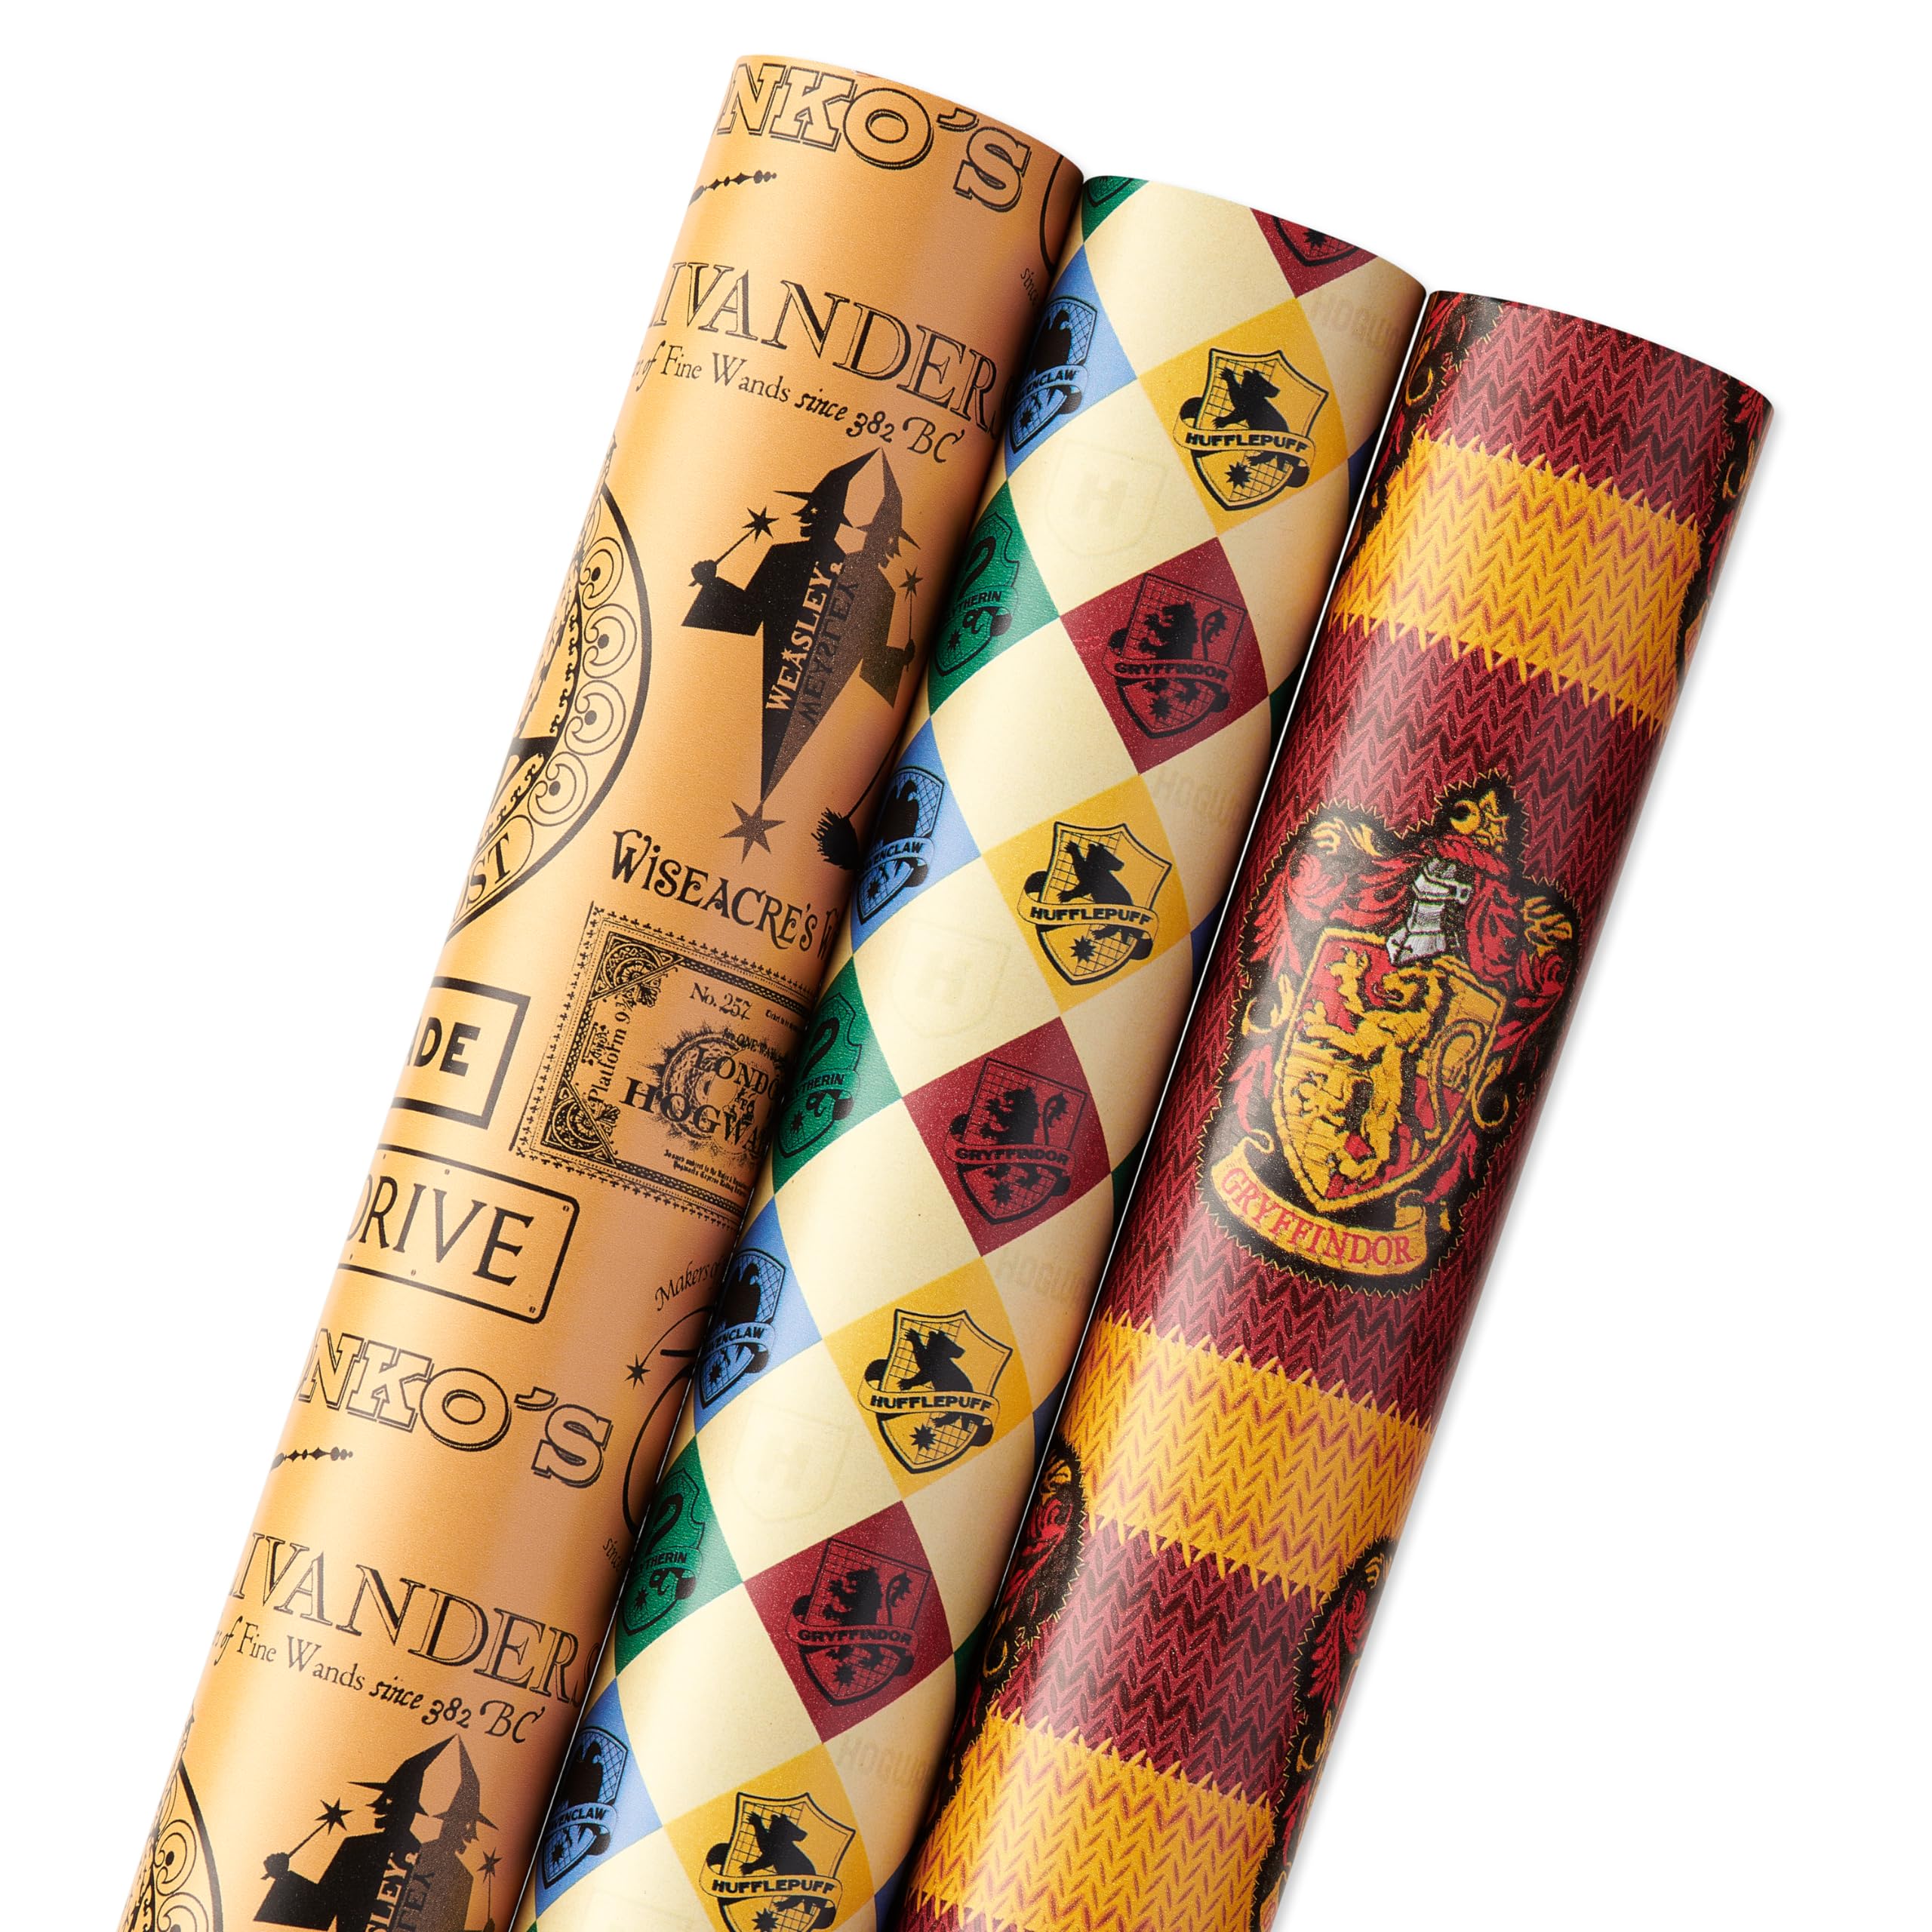 American Greetings 105 sq. ft. Harry Potter Wrapping Paper Set with Gridlines for Birthdays, Graduations and All Occasions, Hogwarts House Crests, Gryffindor Robe and Marauders Map (3 Rolls, 30 in. x 14 ft. each)